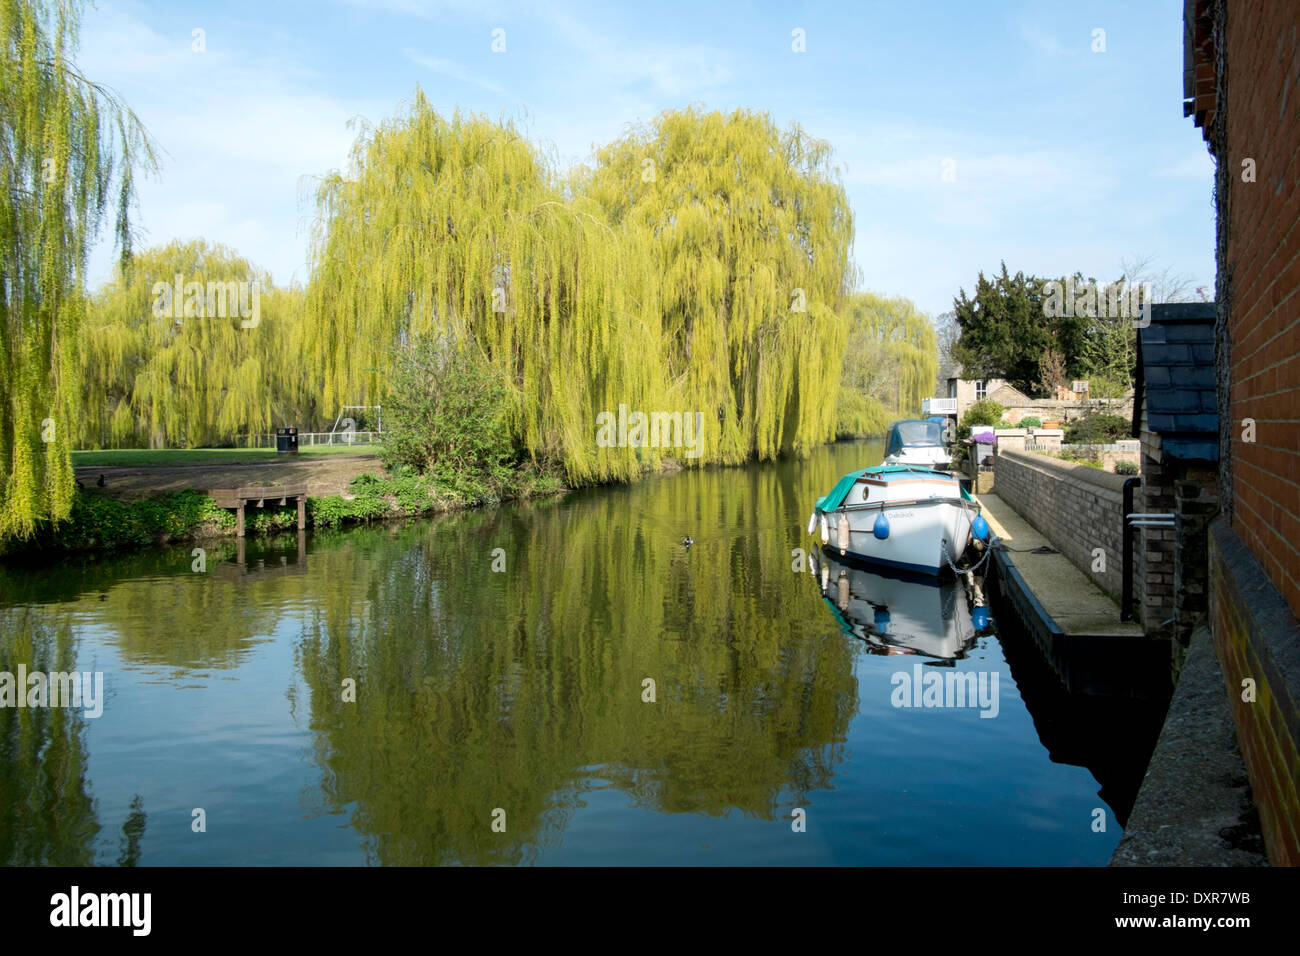 River scene on the Great Ouse. Stock Photo